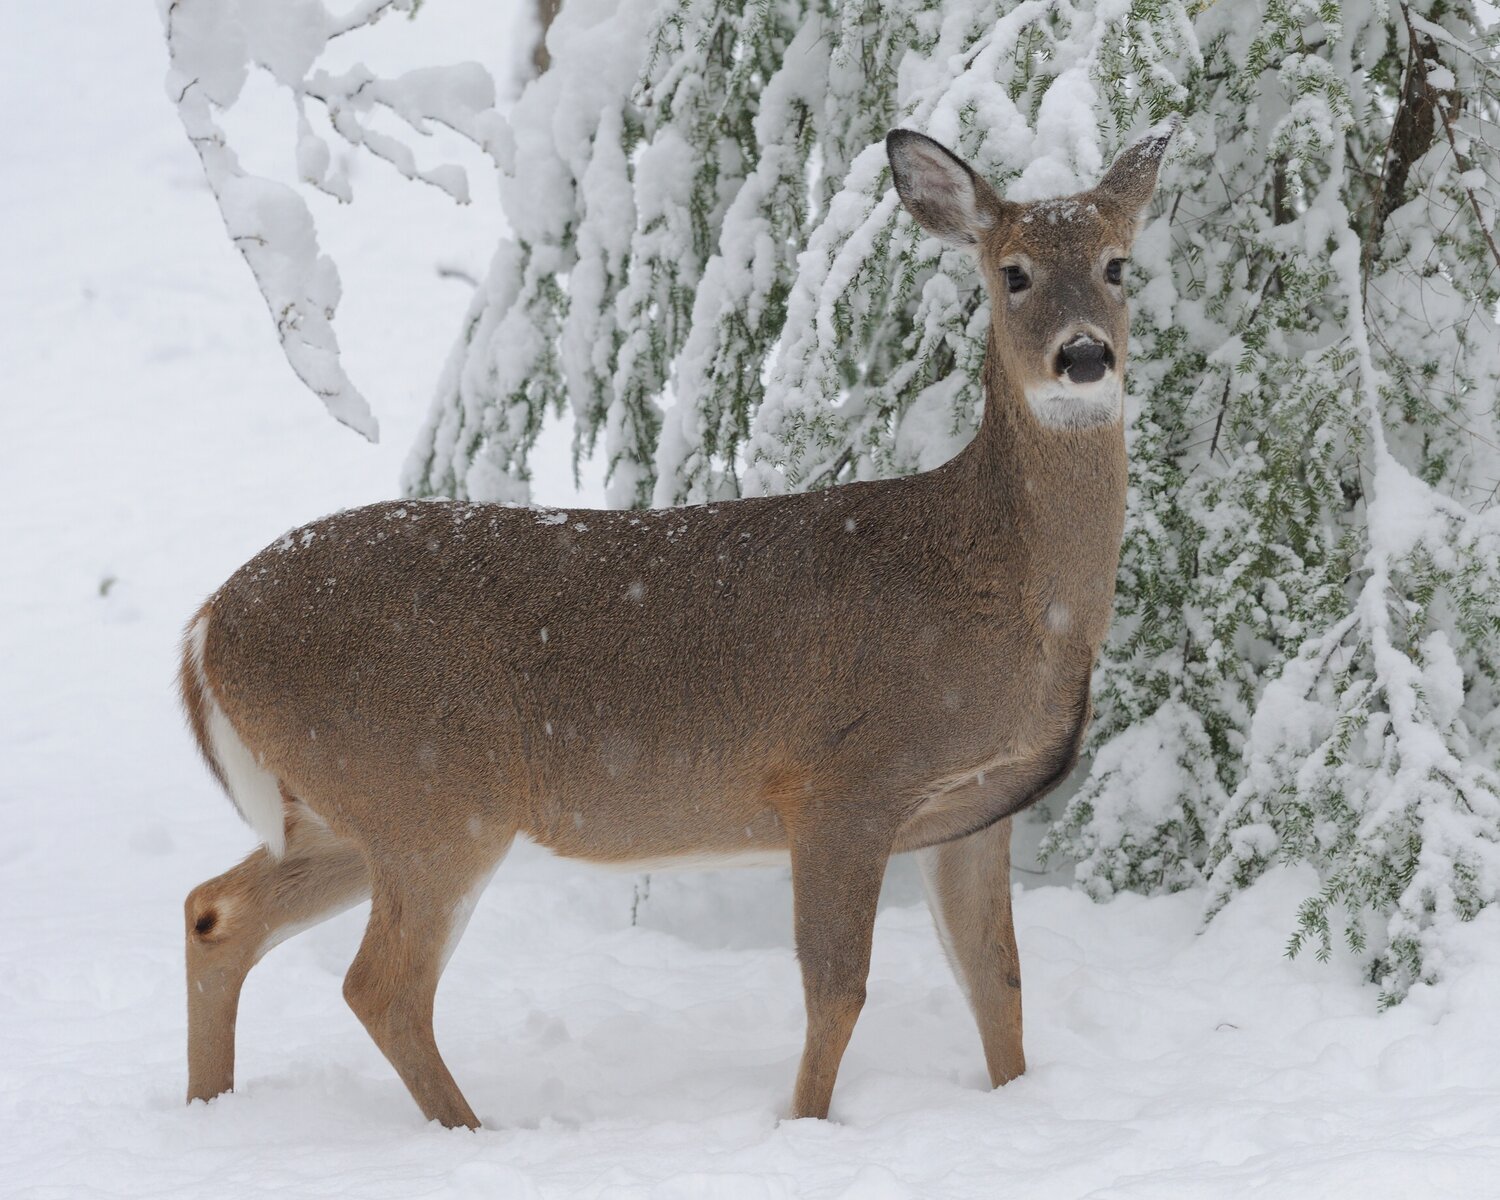 This was a doe seen during a snowstorm a few winters back. It appeared to be a full-grown doe with a darker brown winter coat. A winter coat is thicker to protect against rain, snow and sub-zero temperatures. In the case of young-of-year fawns, their spots are no longer present when the winter coat grows in. ..When deer molt, they might have a patchy appearance, looking almost like mange. It is normal, as one part of the coat might be old, with new coat growing next to it; it's not mange and the deer is perfectly healthy.